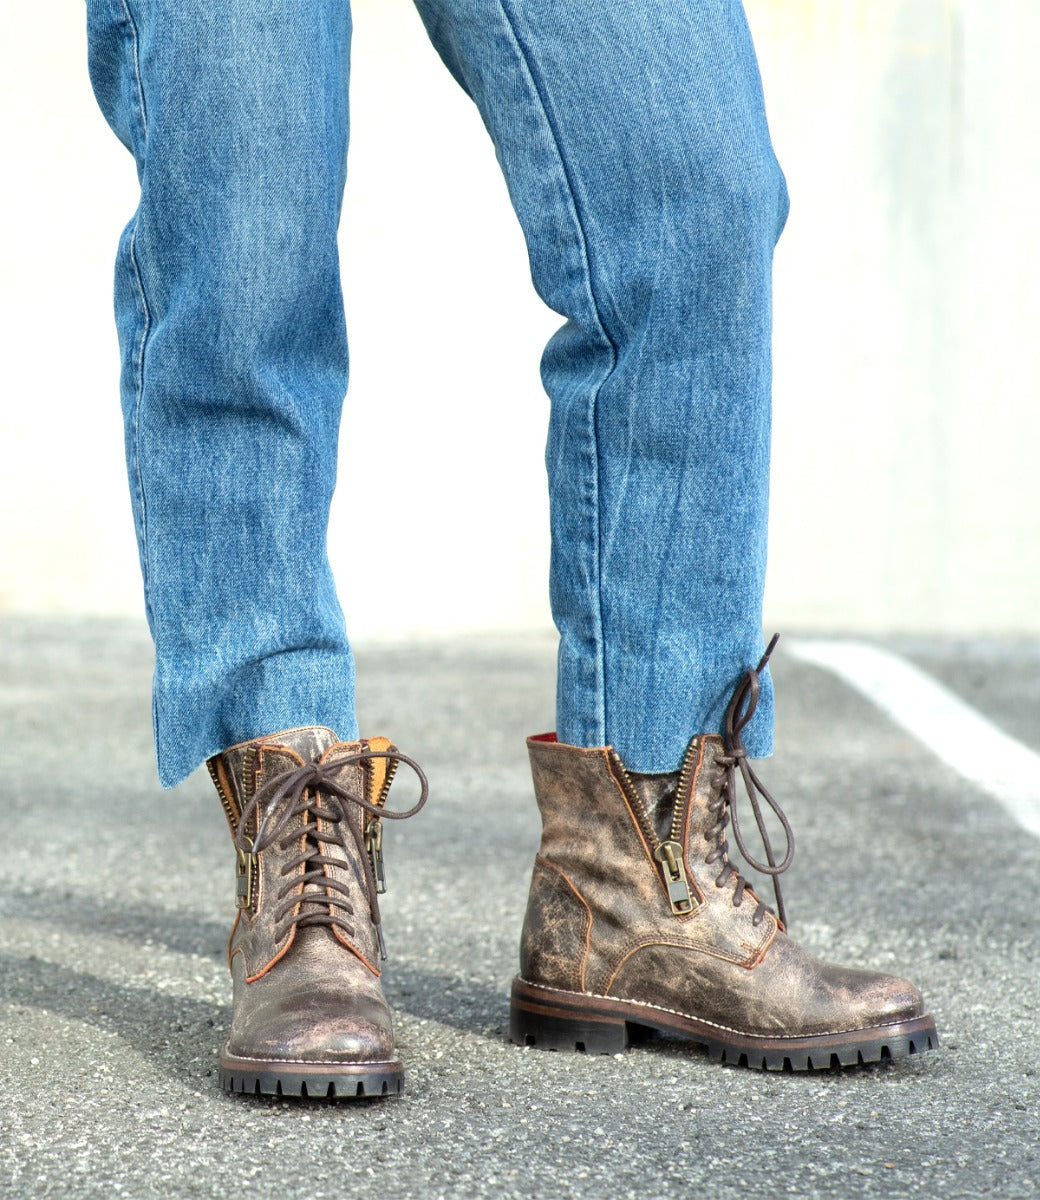 A person in Tactic Trek jeans and Bed Stu boots standing in a parking lot.